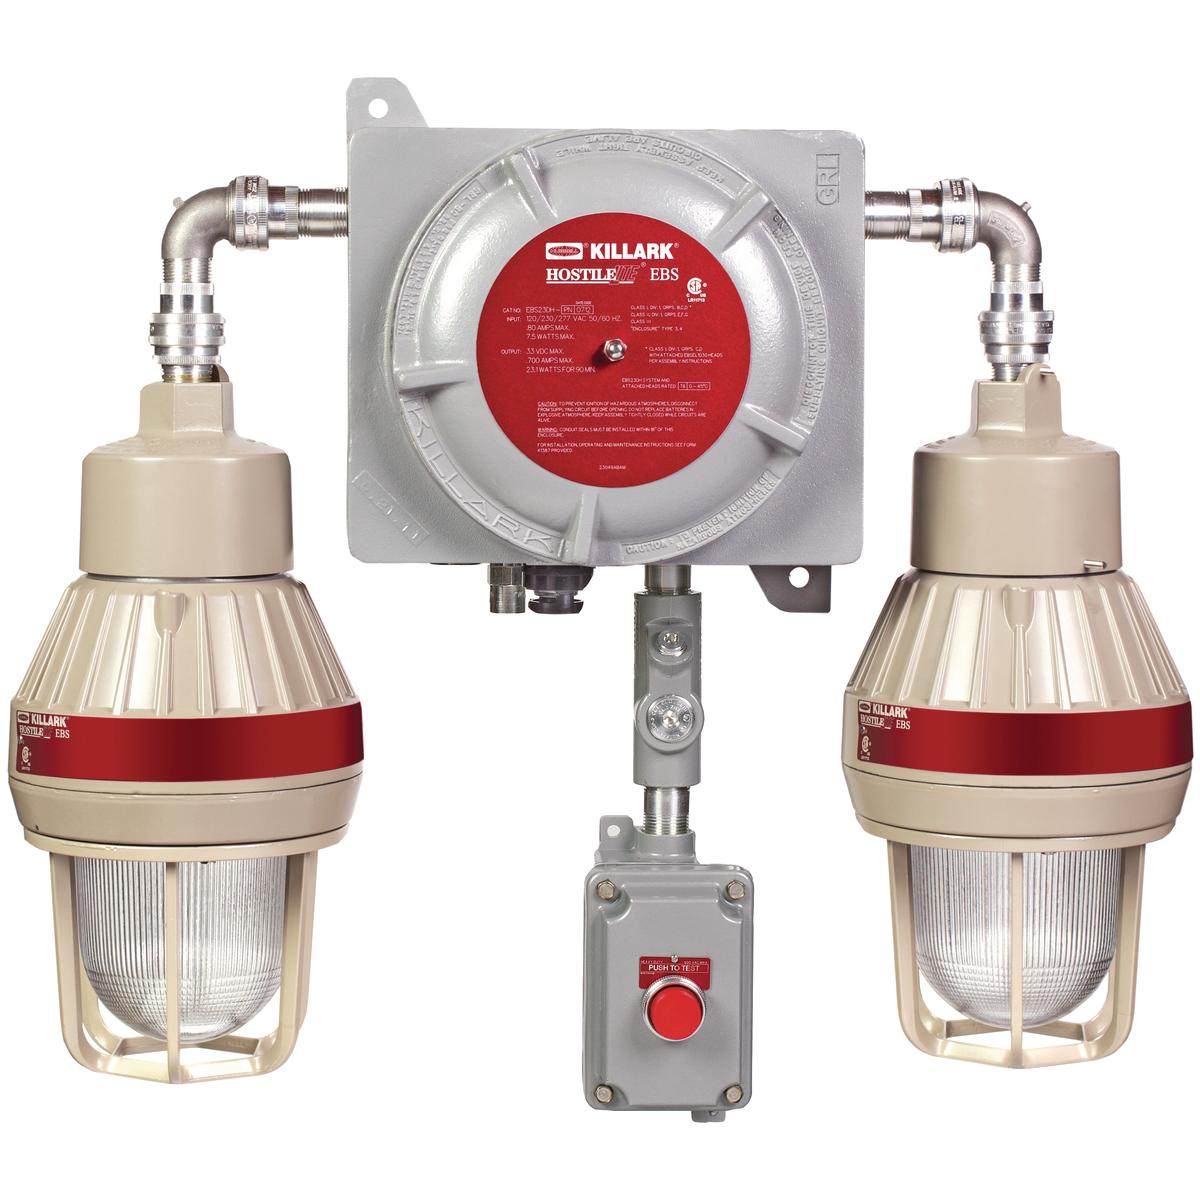 Hubbell EBS23DH-RNBG The EBS Series Explosion Proof LED Emergency Battery Backup System is designed for egress or anti-panic applications. This fixture is made with a cast copper-free aluminum housing and fixture heads that are powder epoxy powder coat painted for extra corro